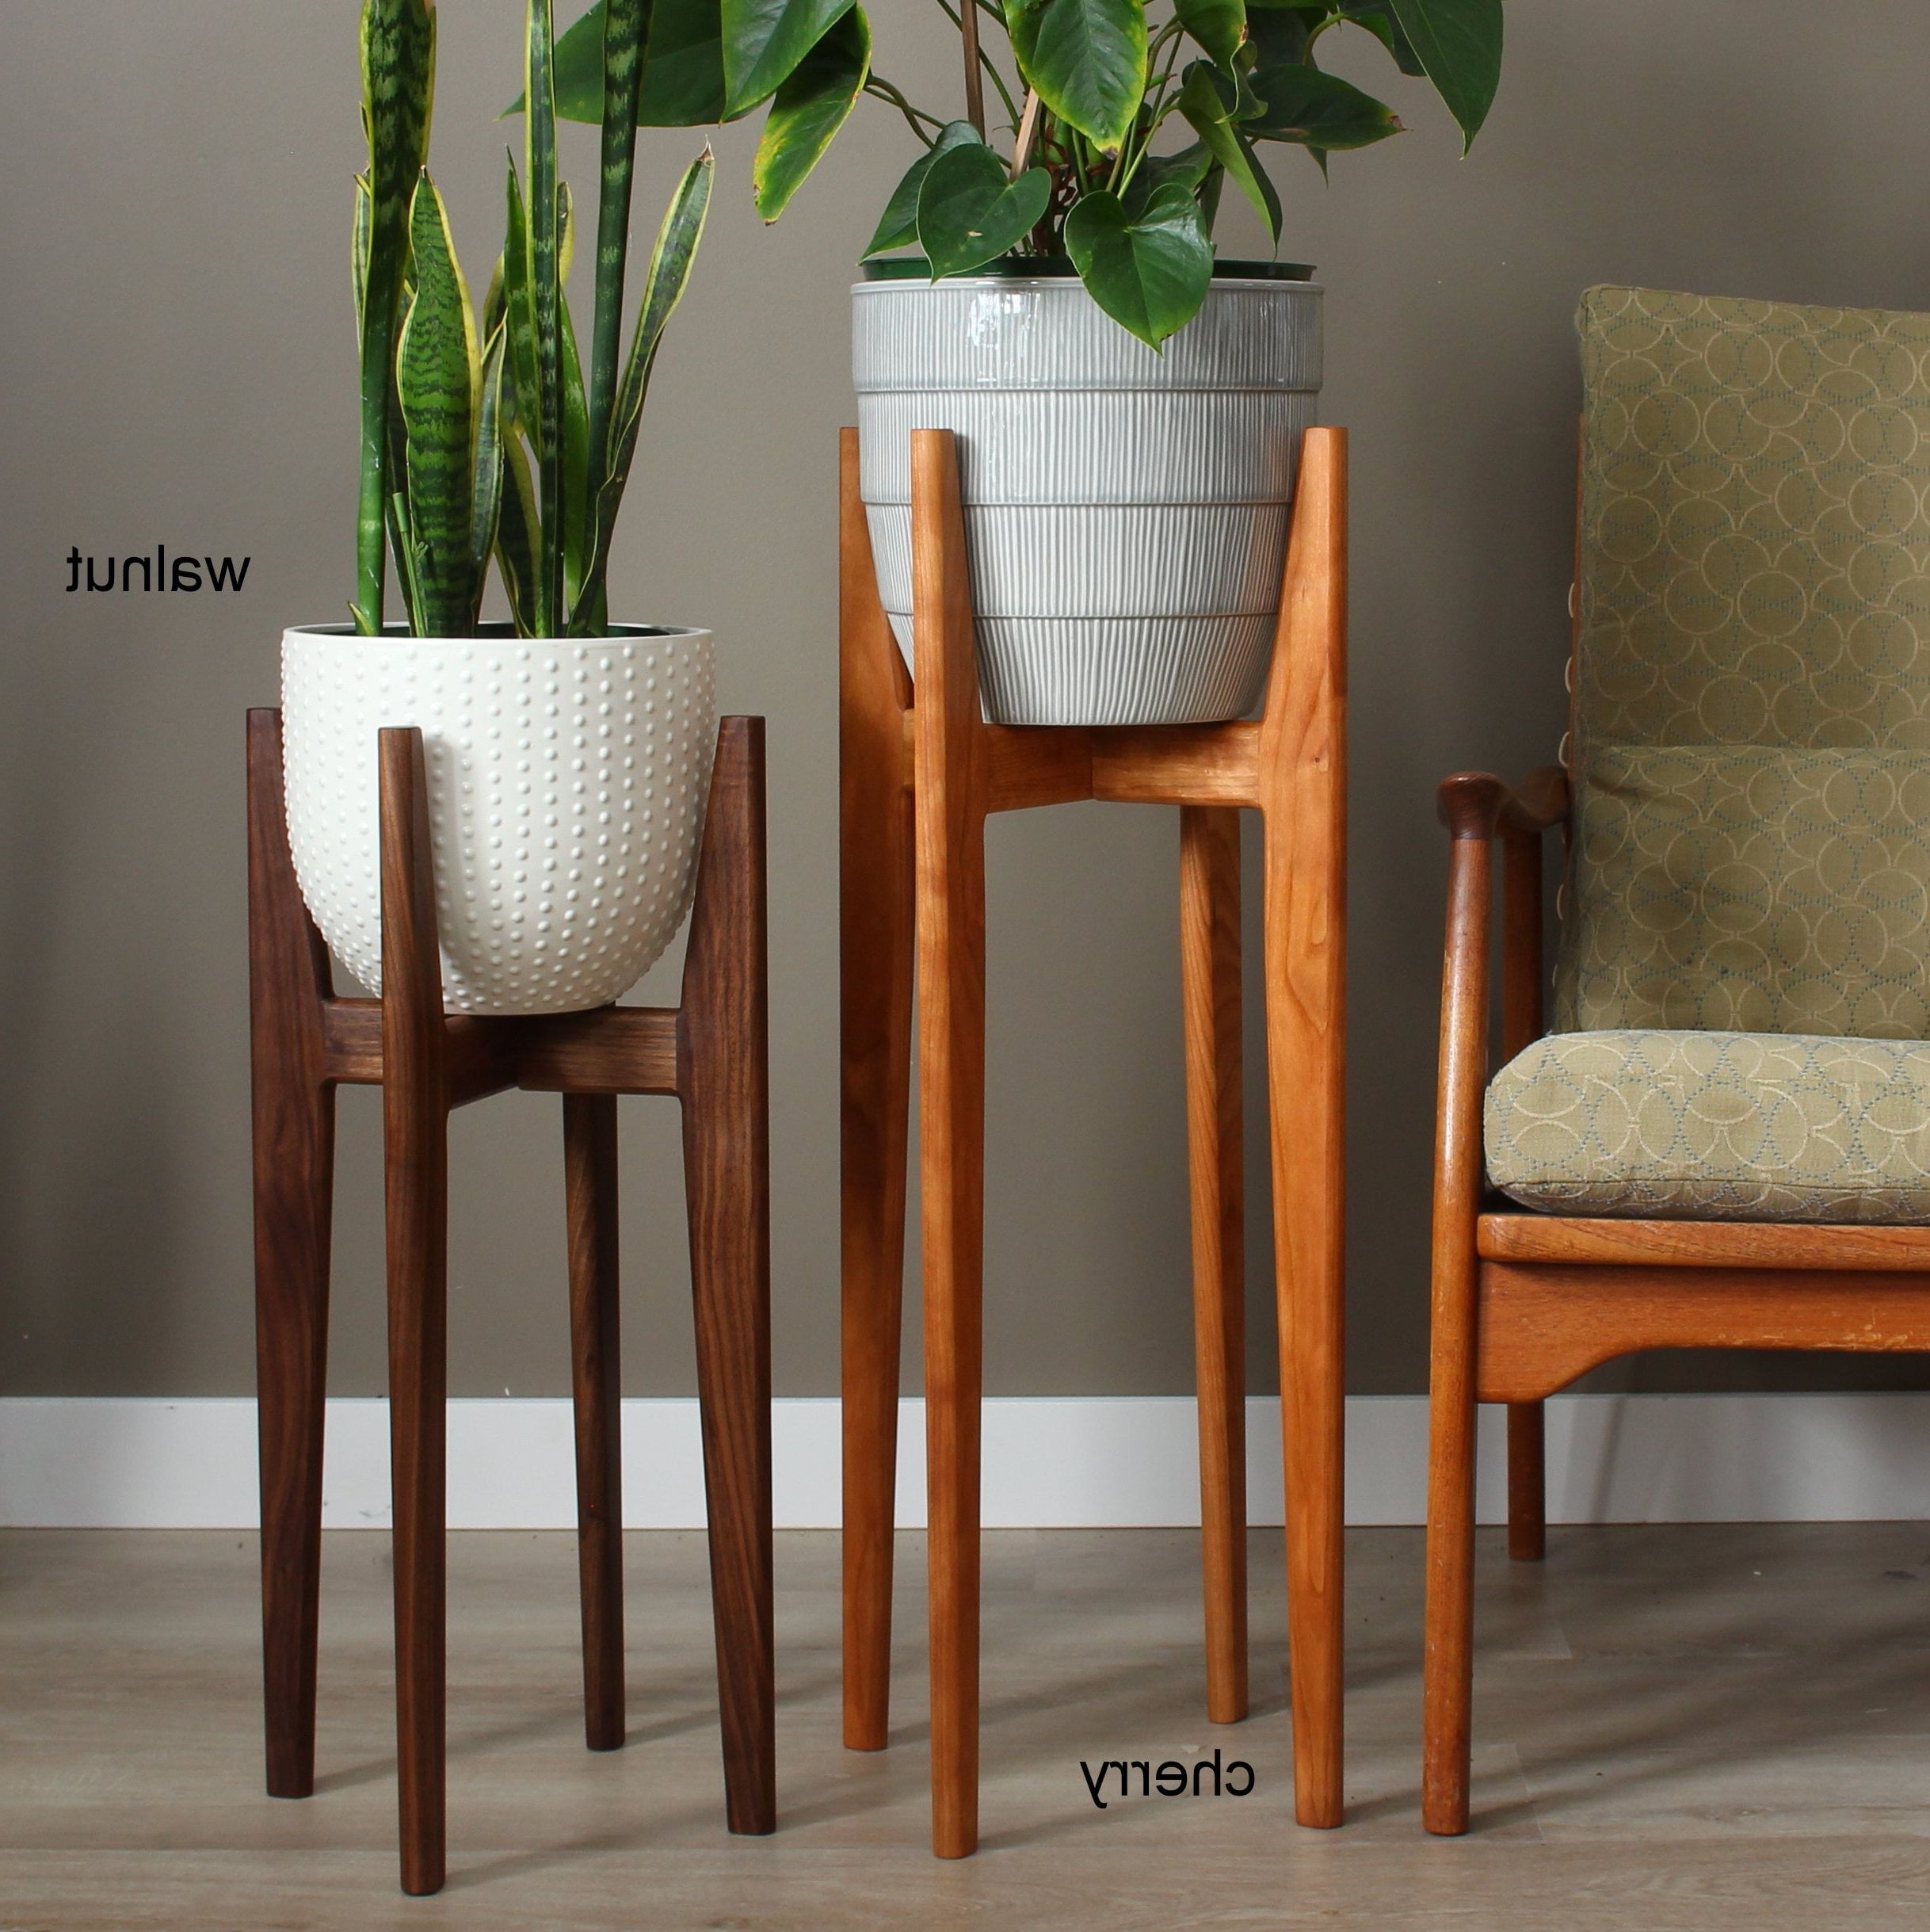 2020 Brown Plant Stands Pertaining To Mid Century Modern Plant Stand Our Original Design Indoor – Etsy Uk (View 6 of 10)